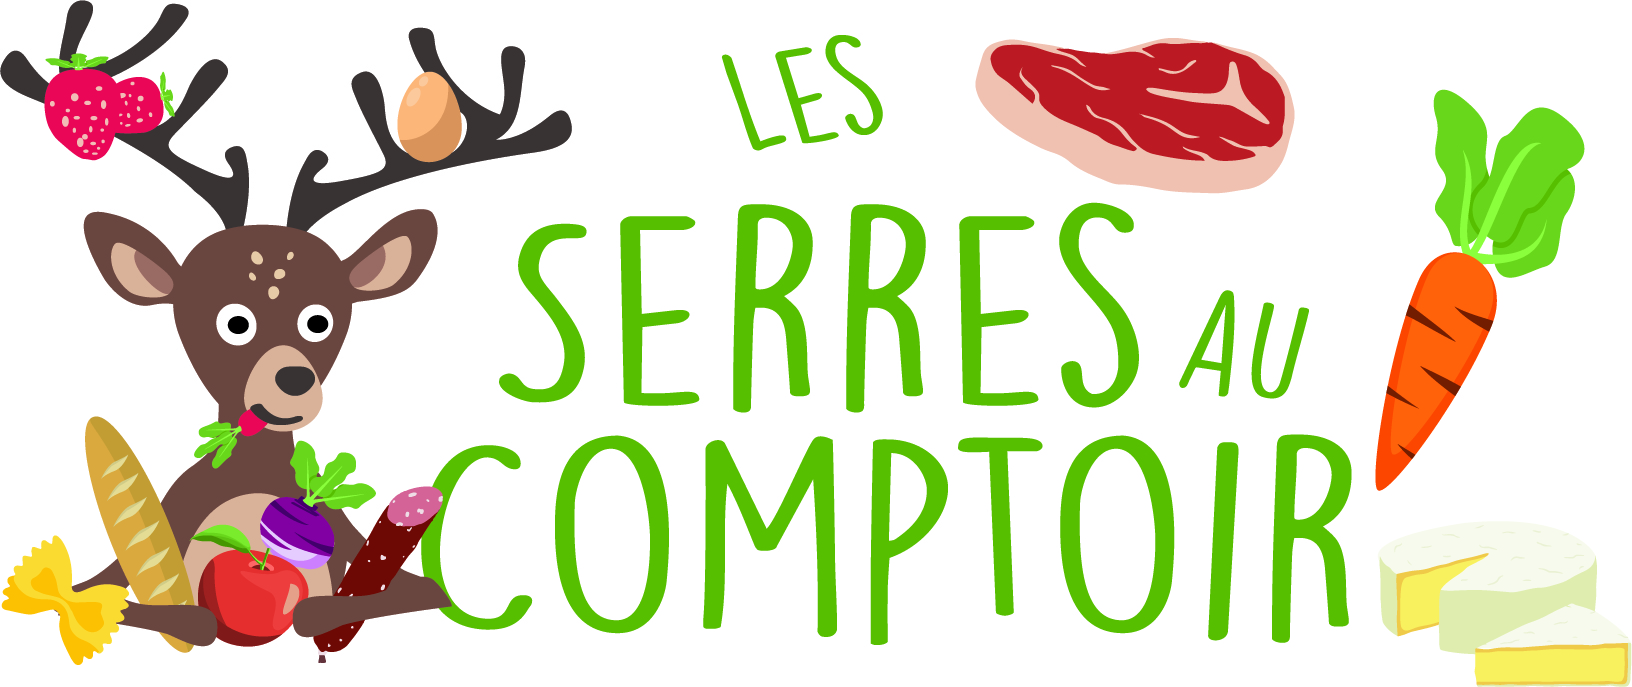 You are currently viewing Les serres au comptoir